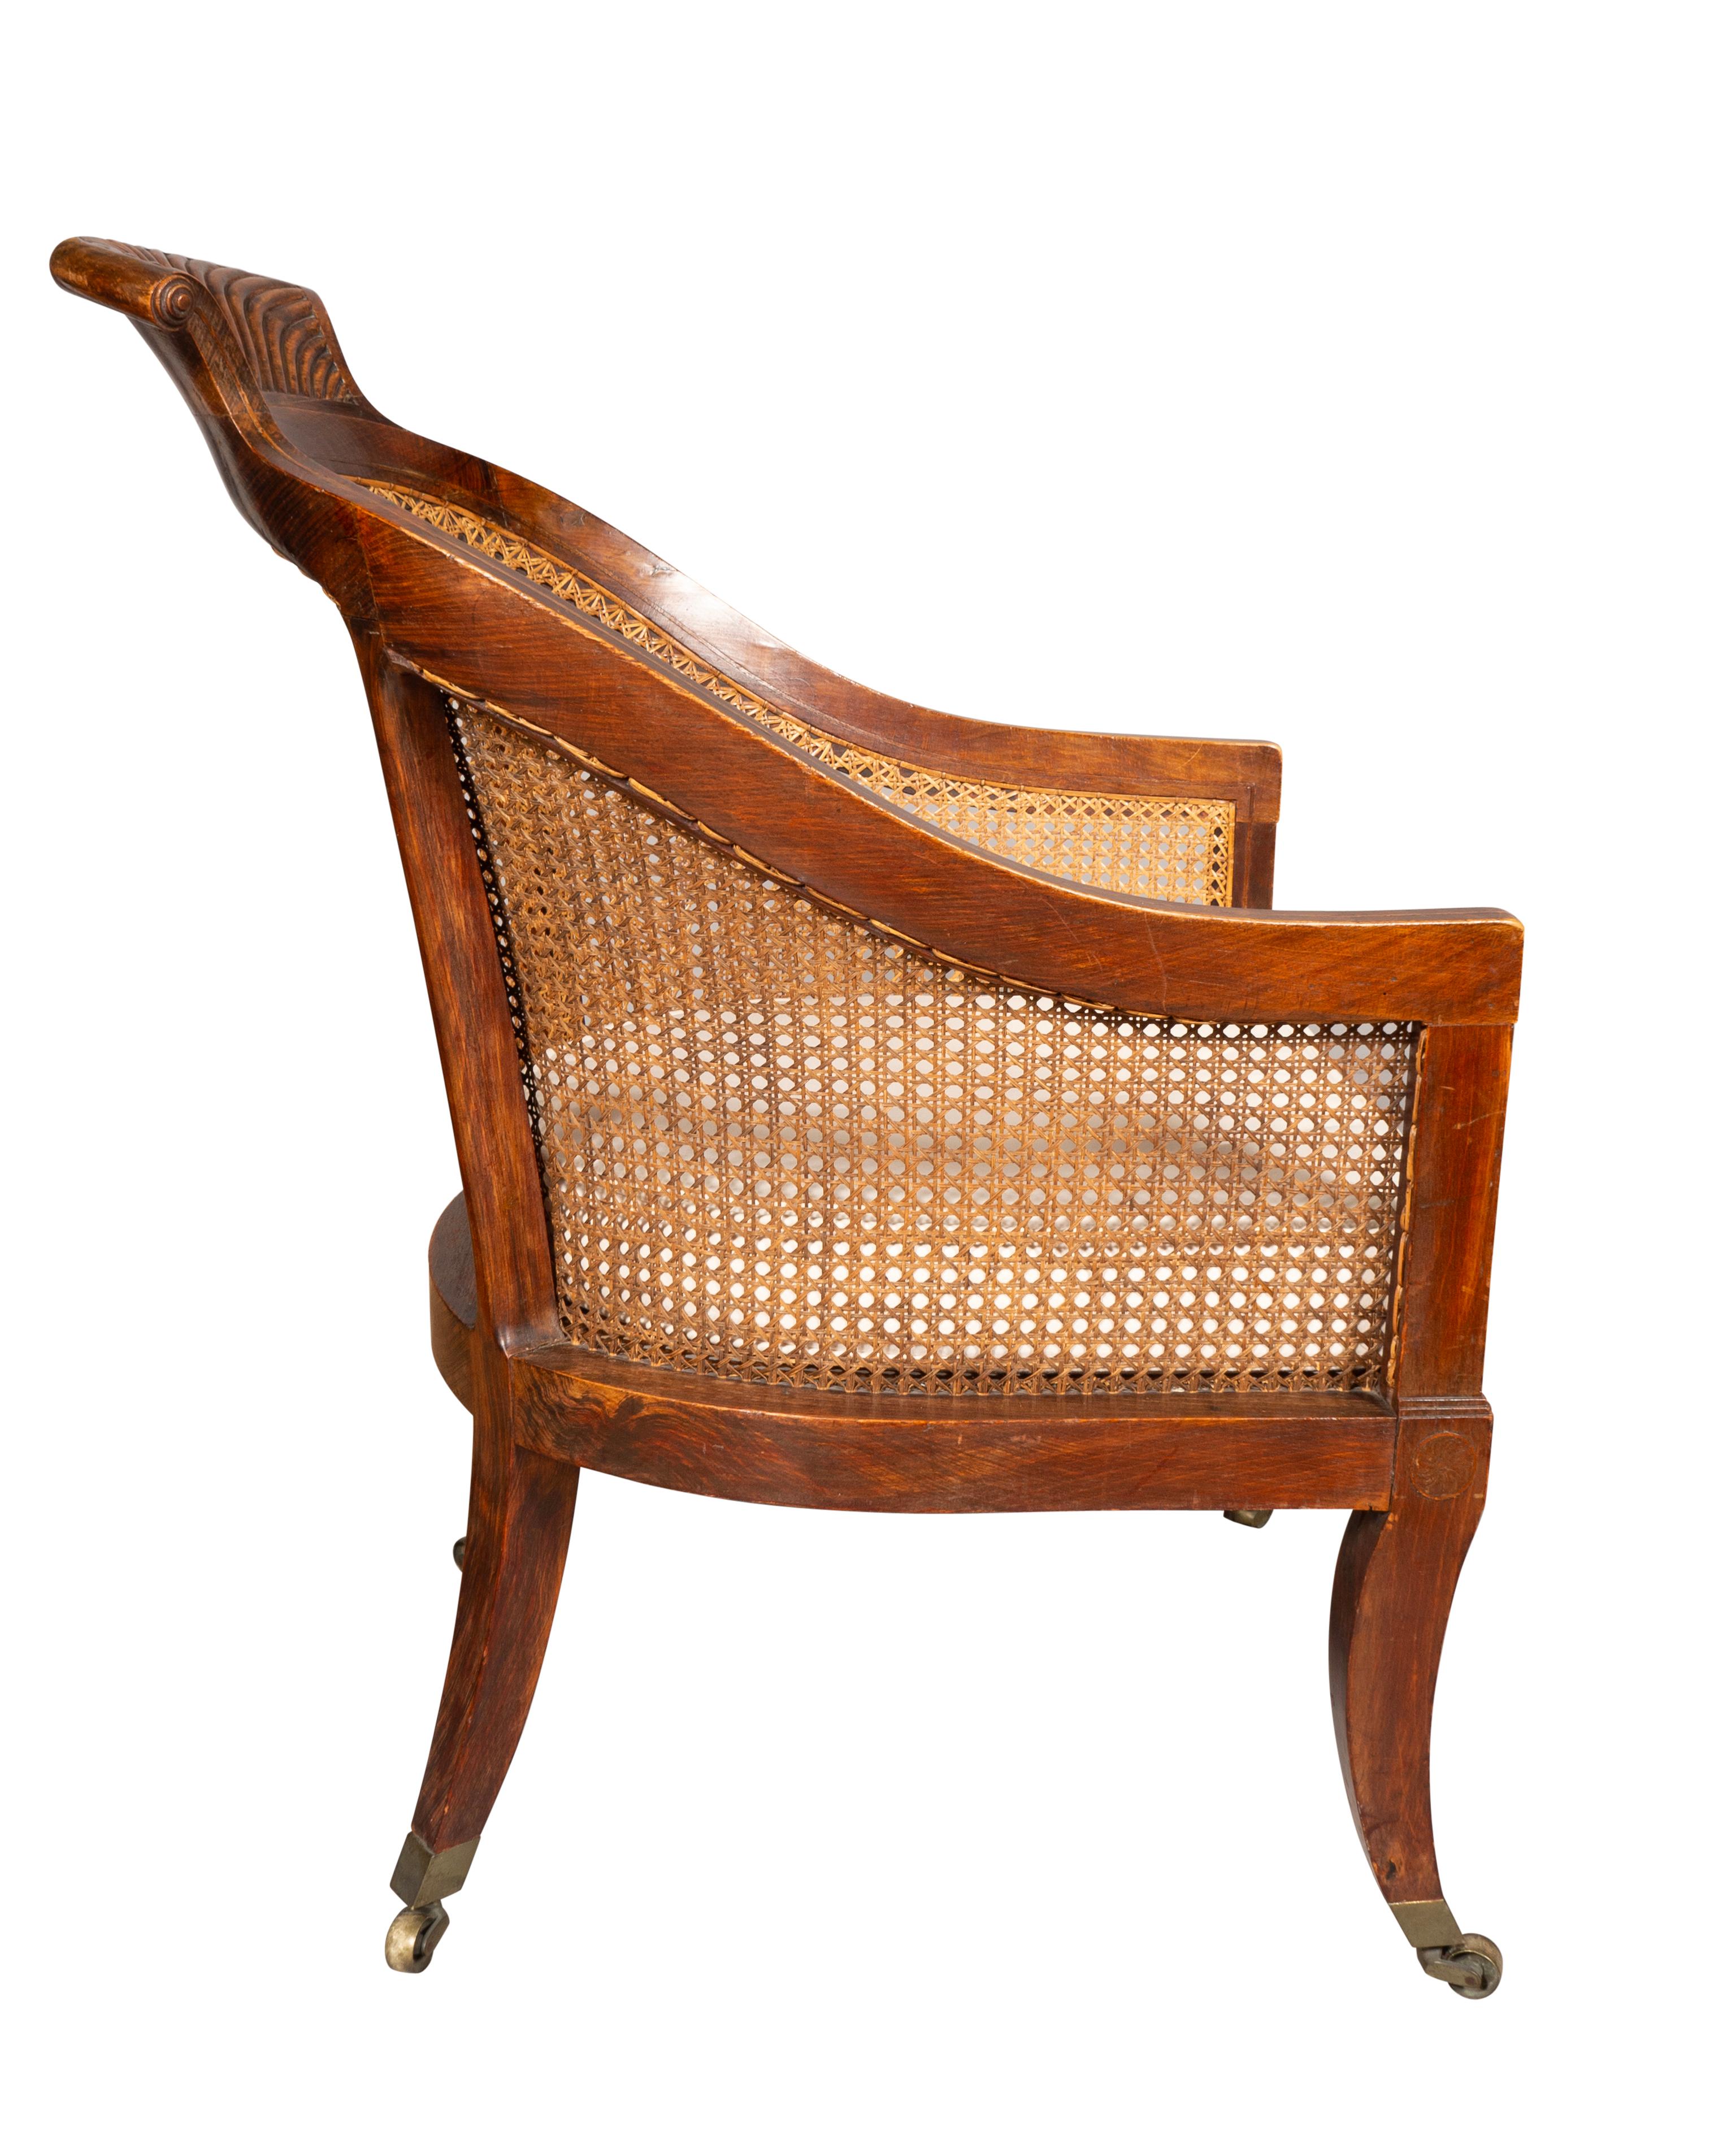 Regency Faux Rosewood Caned Tub Chair (Englisch) im Angebot